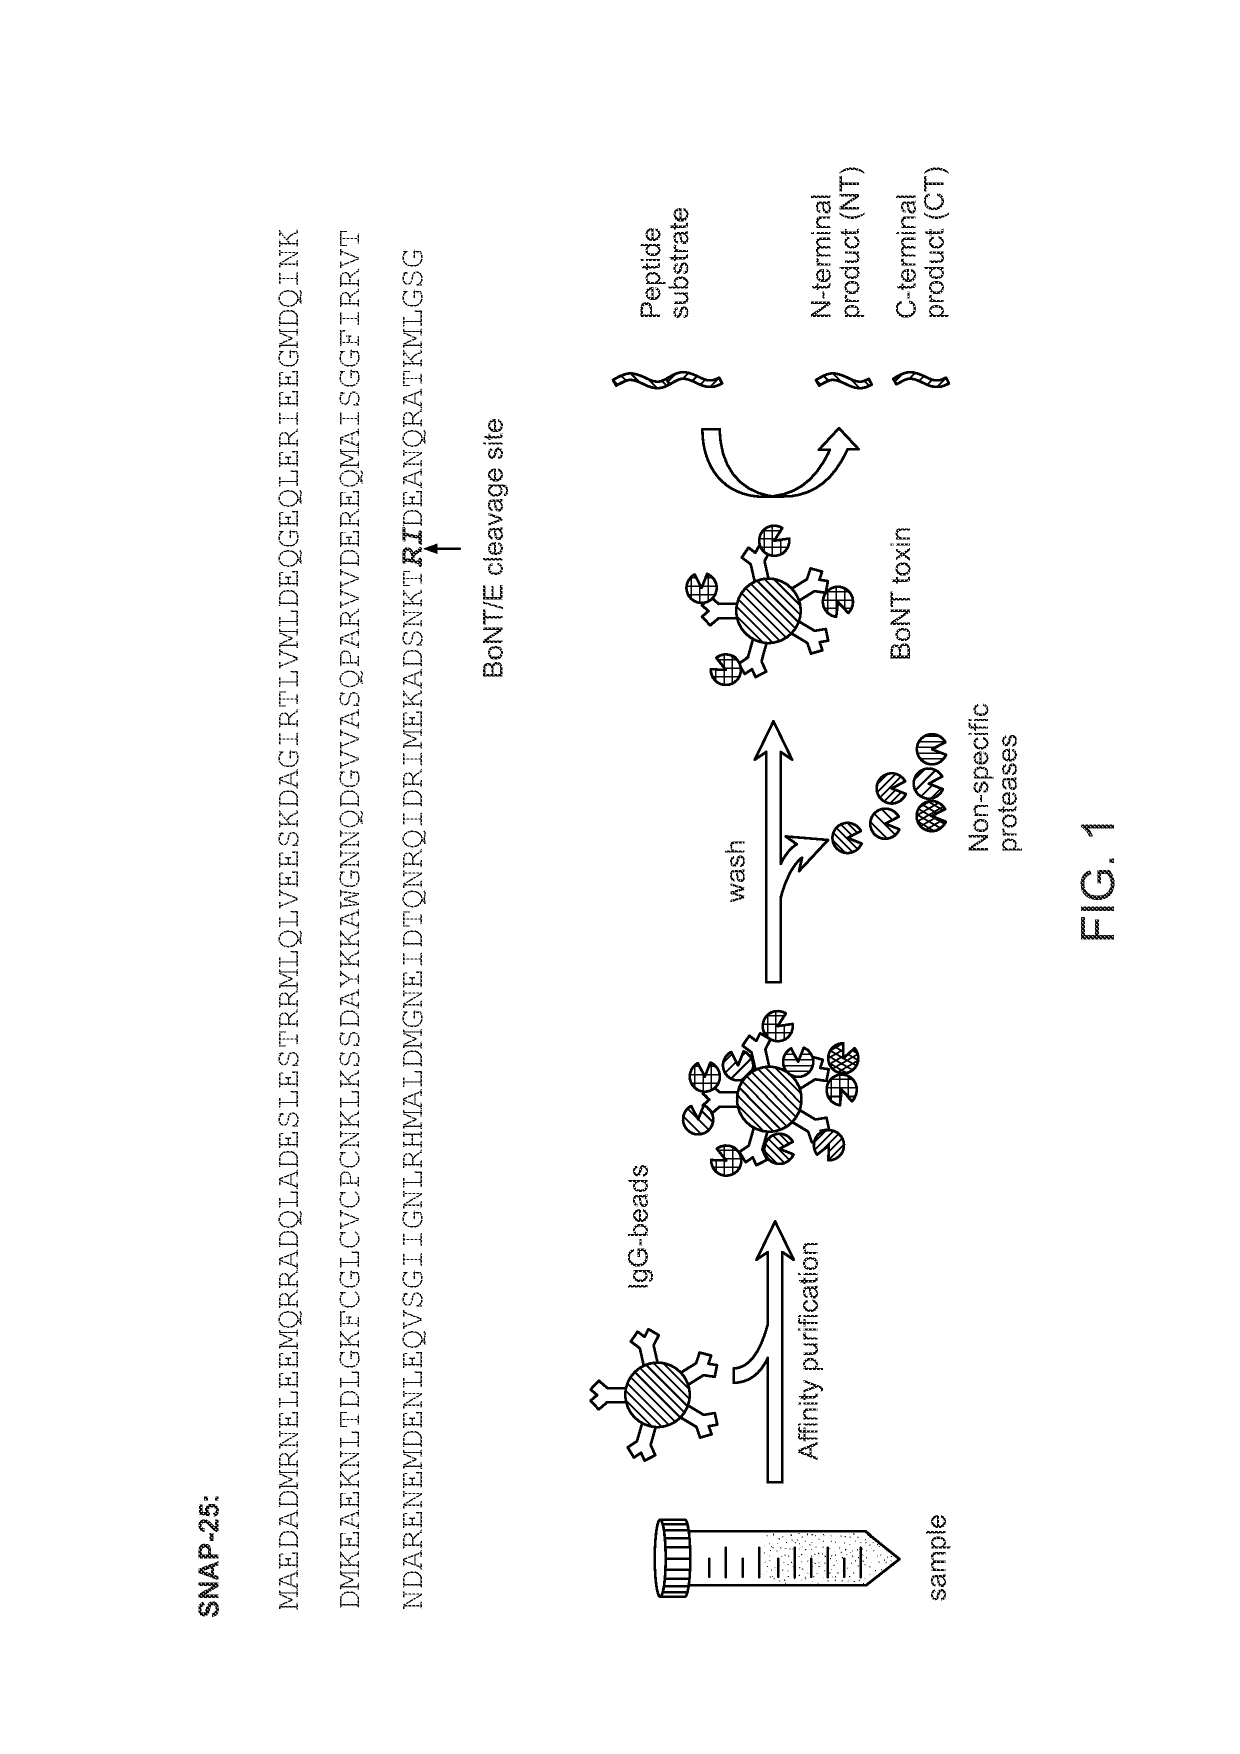 Peptide substrates recognizable by type E botulinum neurotoxin